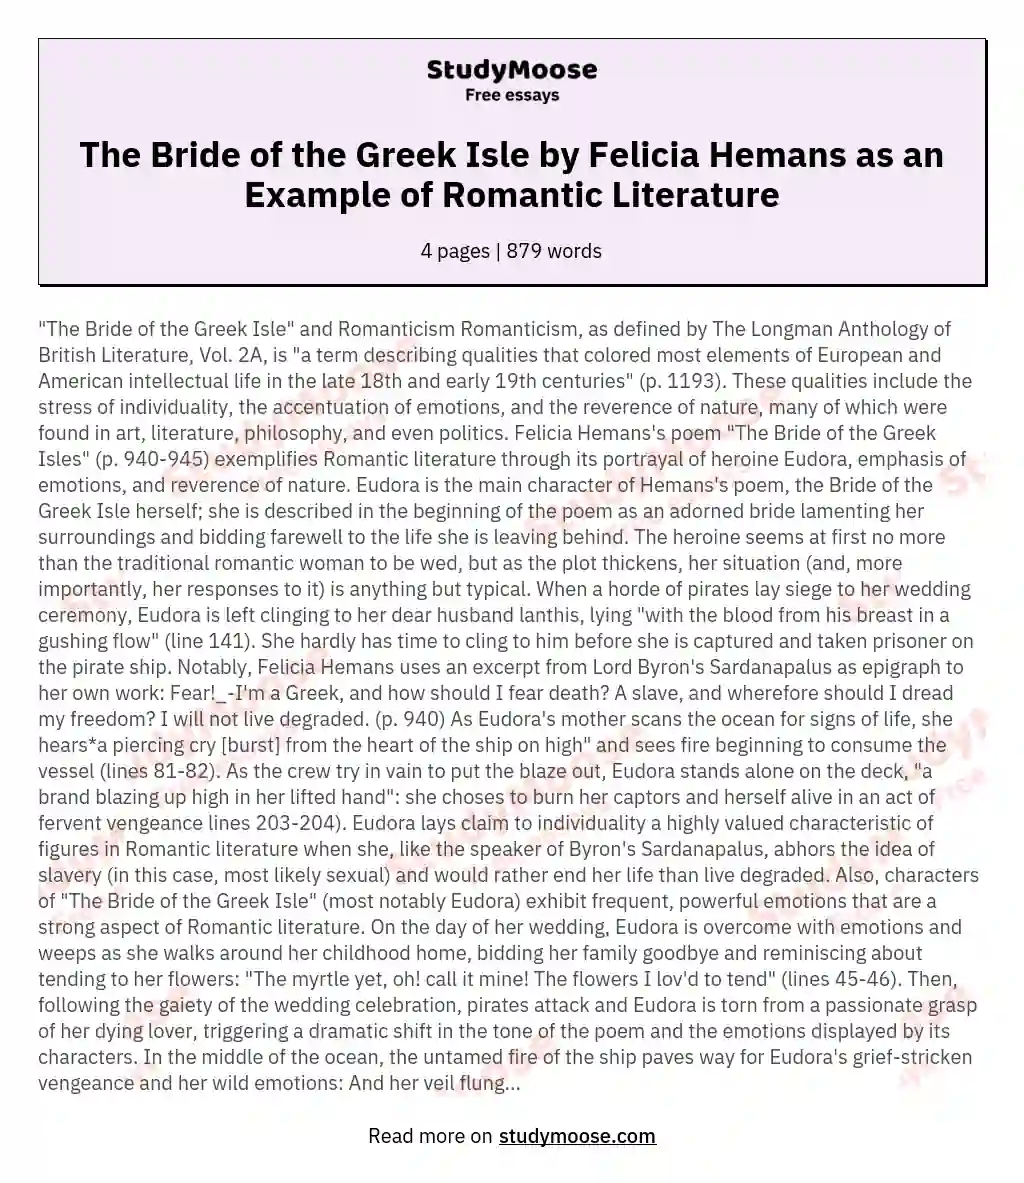 The Bride of the Greek Isle by Felicia Hemans as an Example of Romantic Literature essay